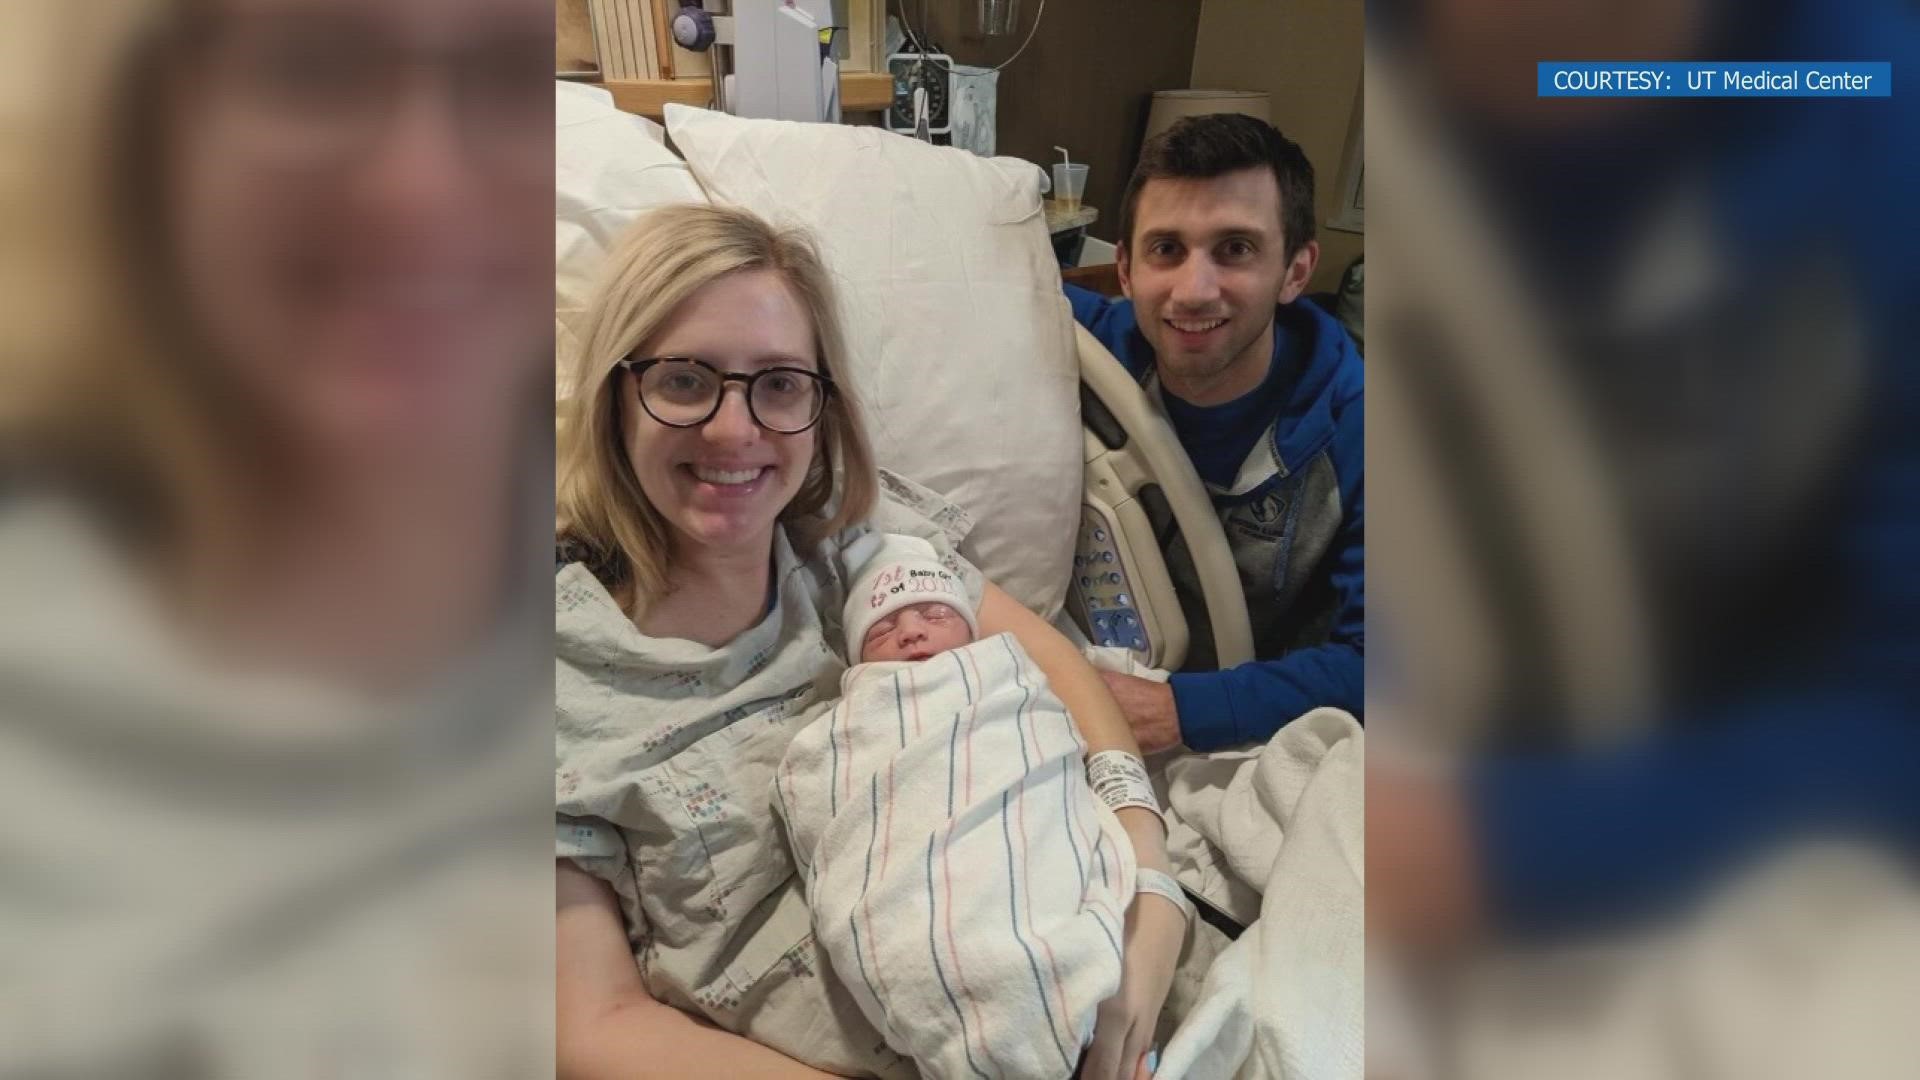 Hannah and Taylor Fatheree welcomed their baby girl, Whitley Rae, just before 3 a.m.